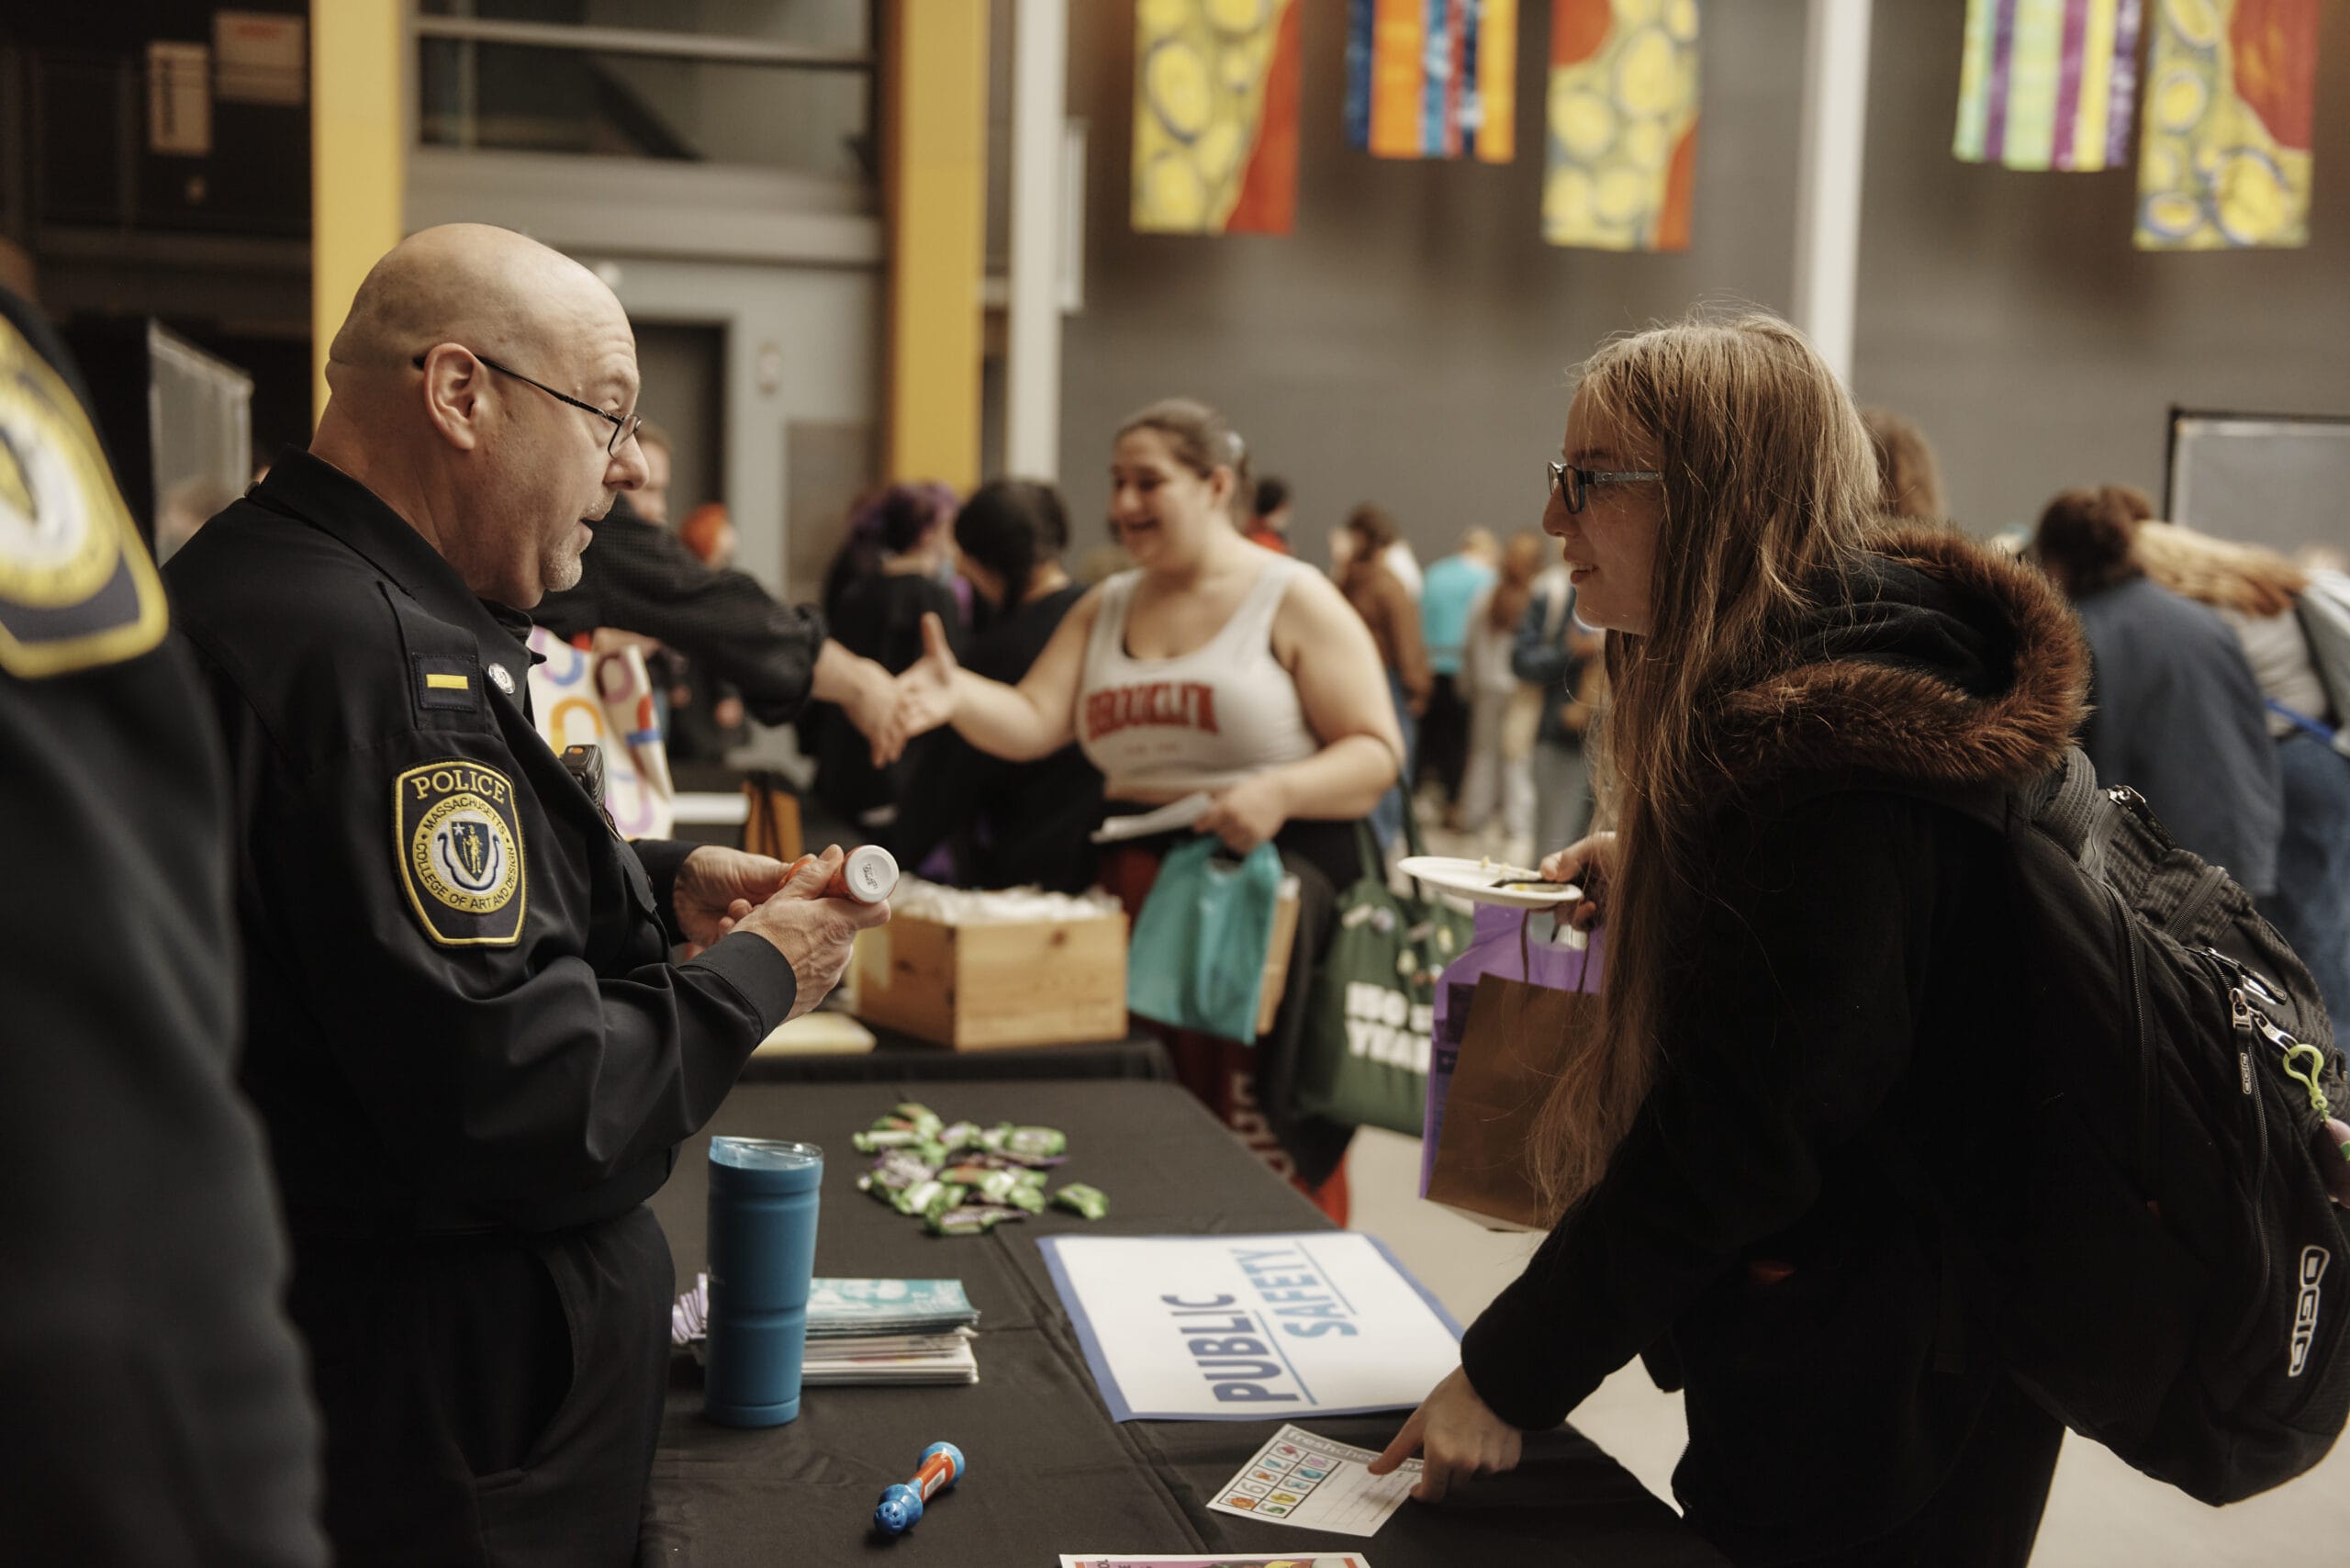 A Public Safety police officer speaks to a student at a community health & wellness fair in the Design and Media Center.